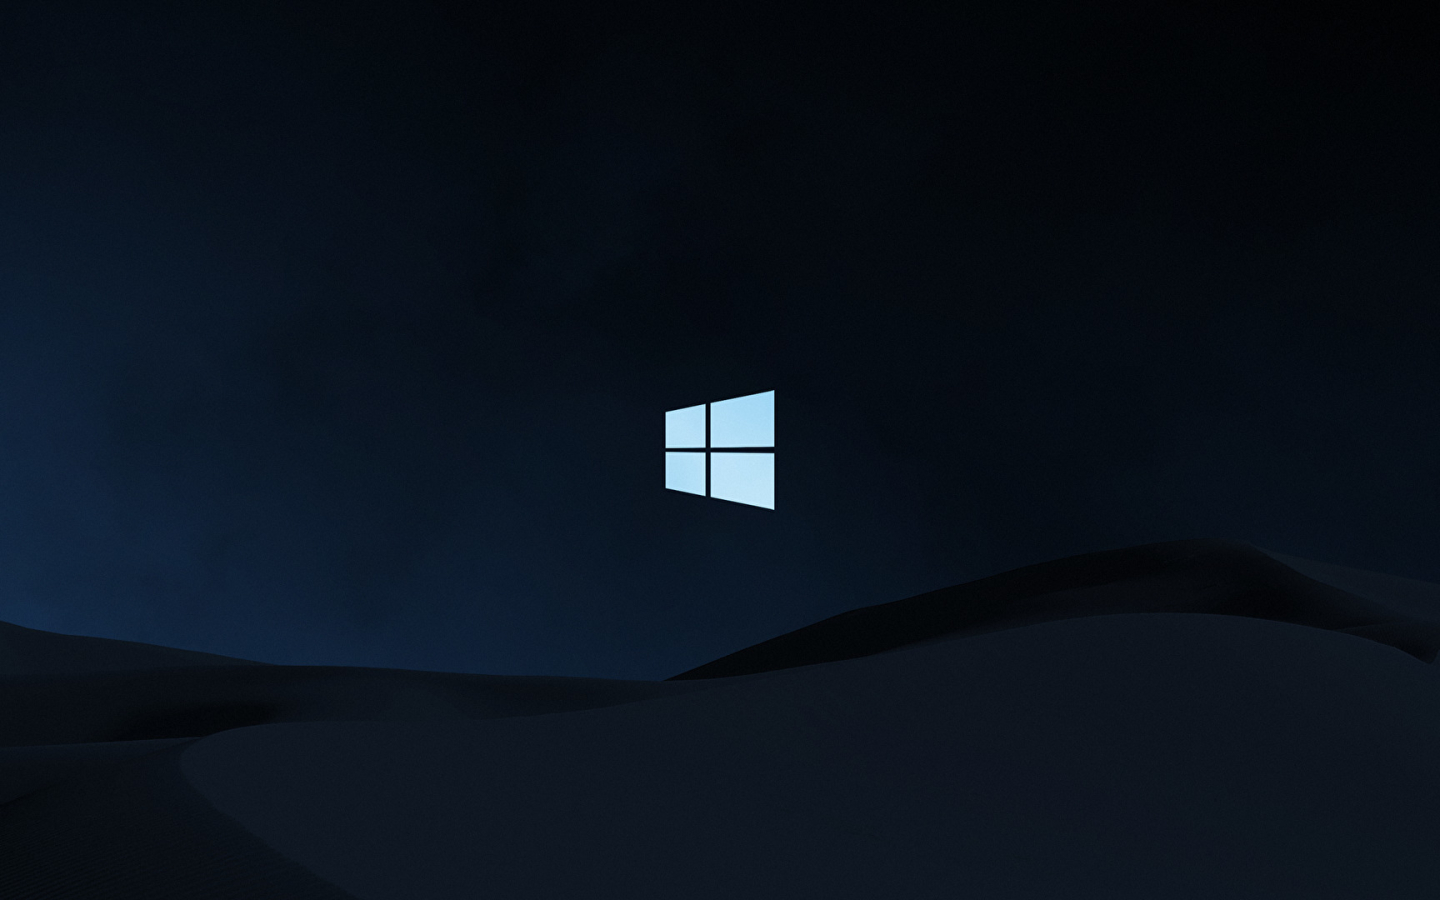 1440x900 Windows 10 Clean Dark 1440x900 Background Hd Brands 4k Wallpapers Images Photos And Background